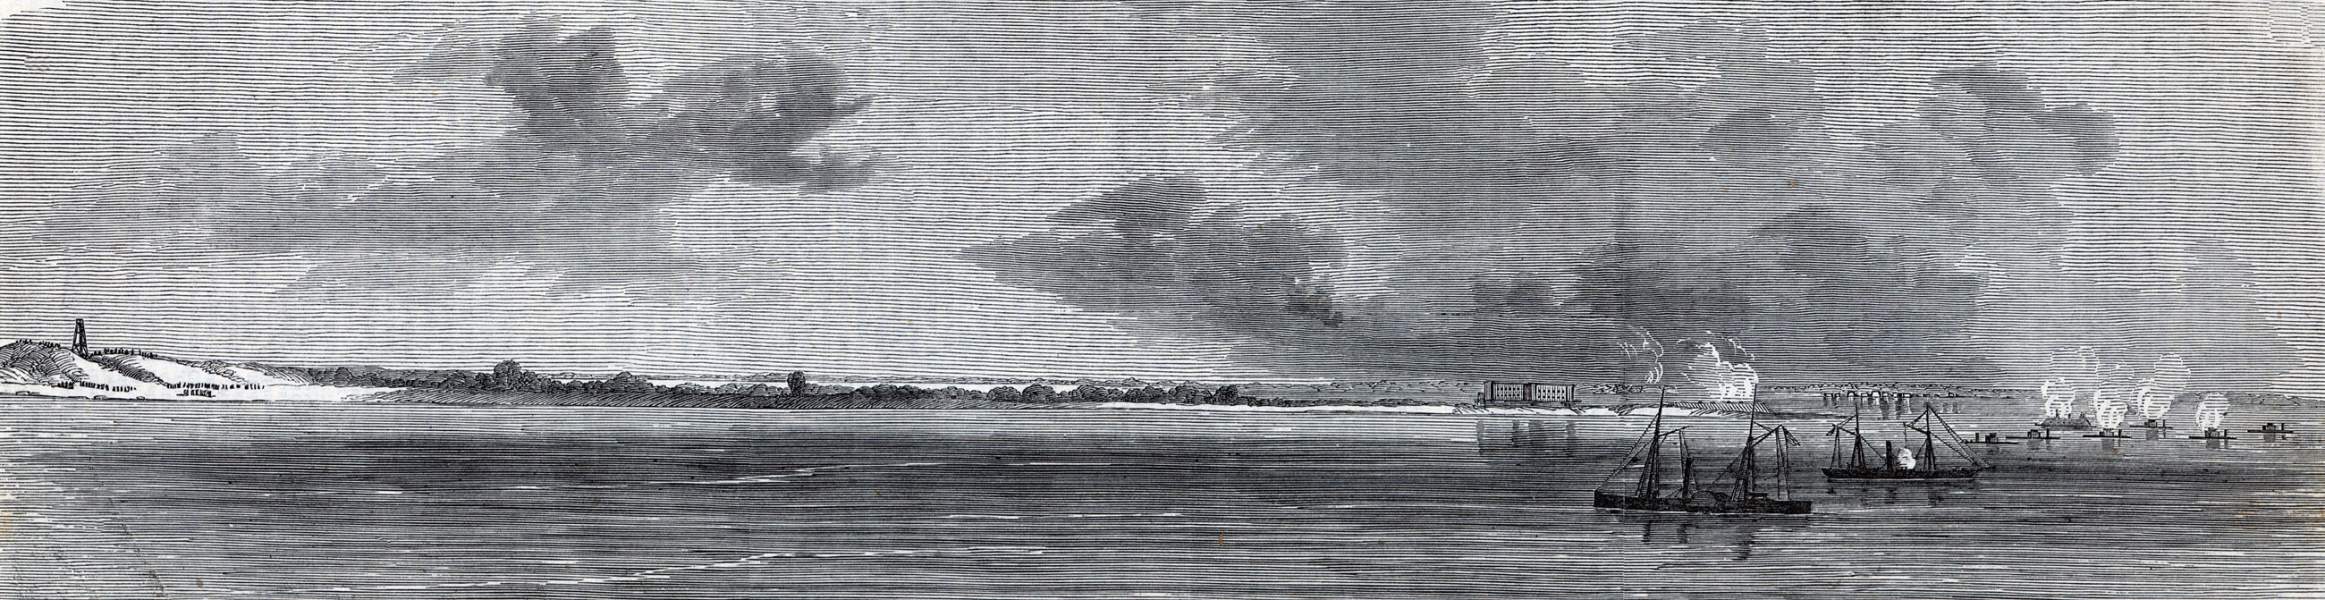 Naval bombardment of lower Morris Island, South Carolina defenses, July 1863, artist's impression, zoomable image